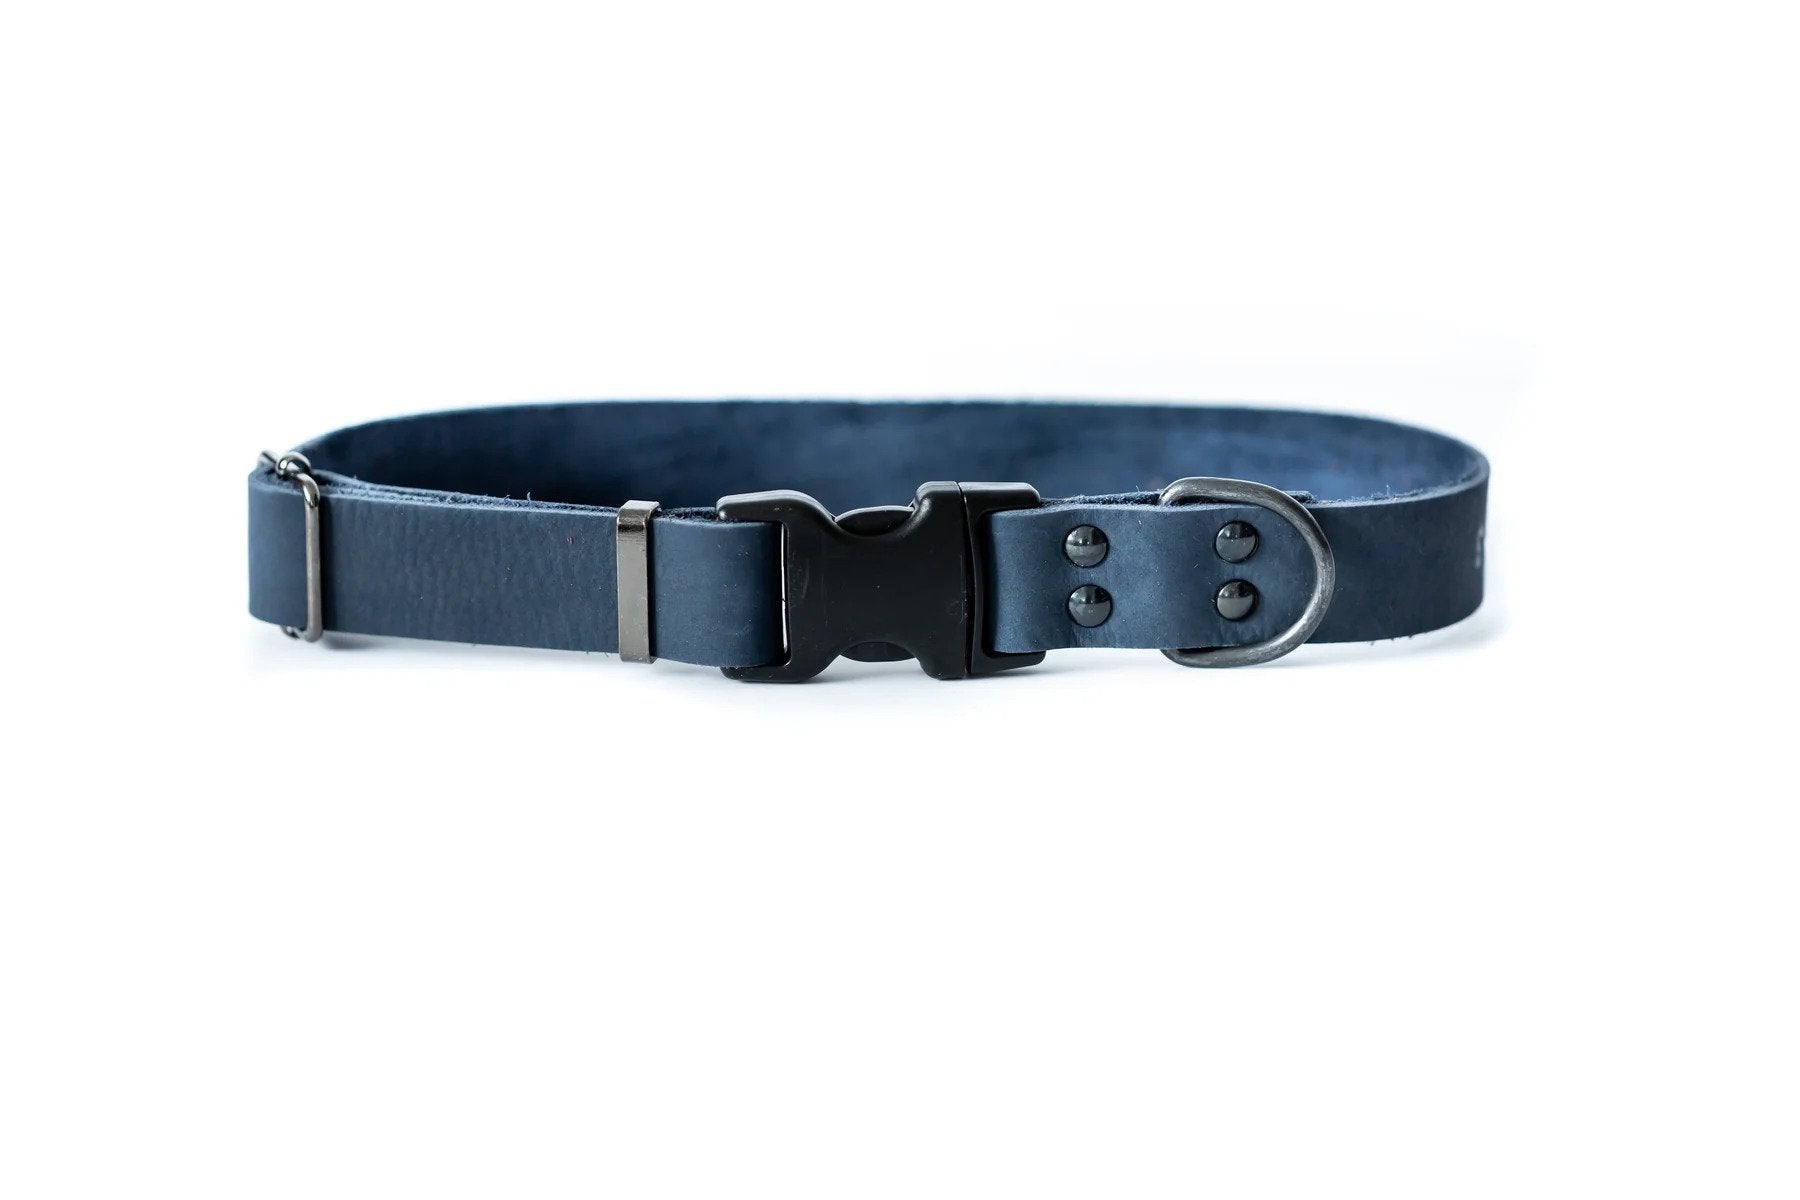 Eurodog Collars Sport Style Soft Leather Quick Release Buckle Dog Collar Navy Very Soft Leather